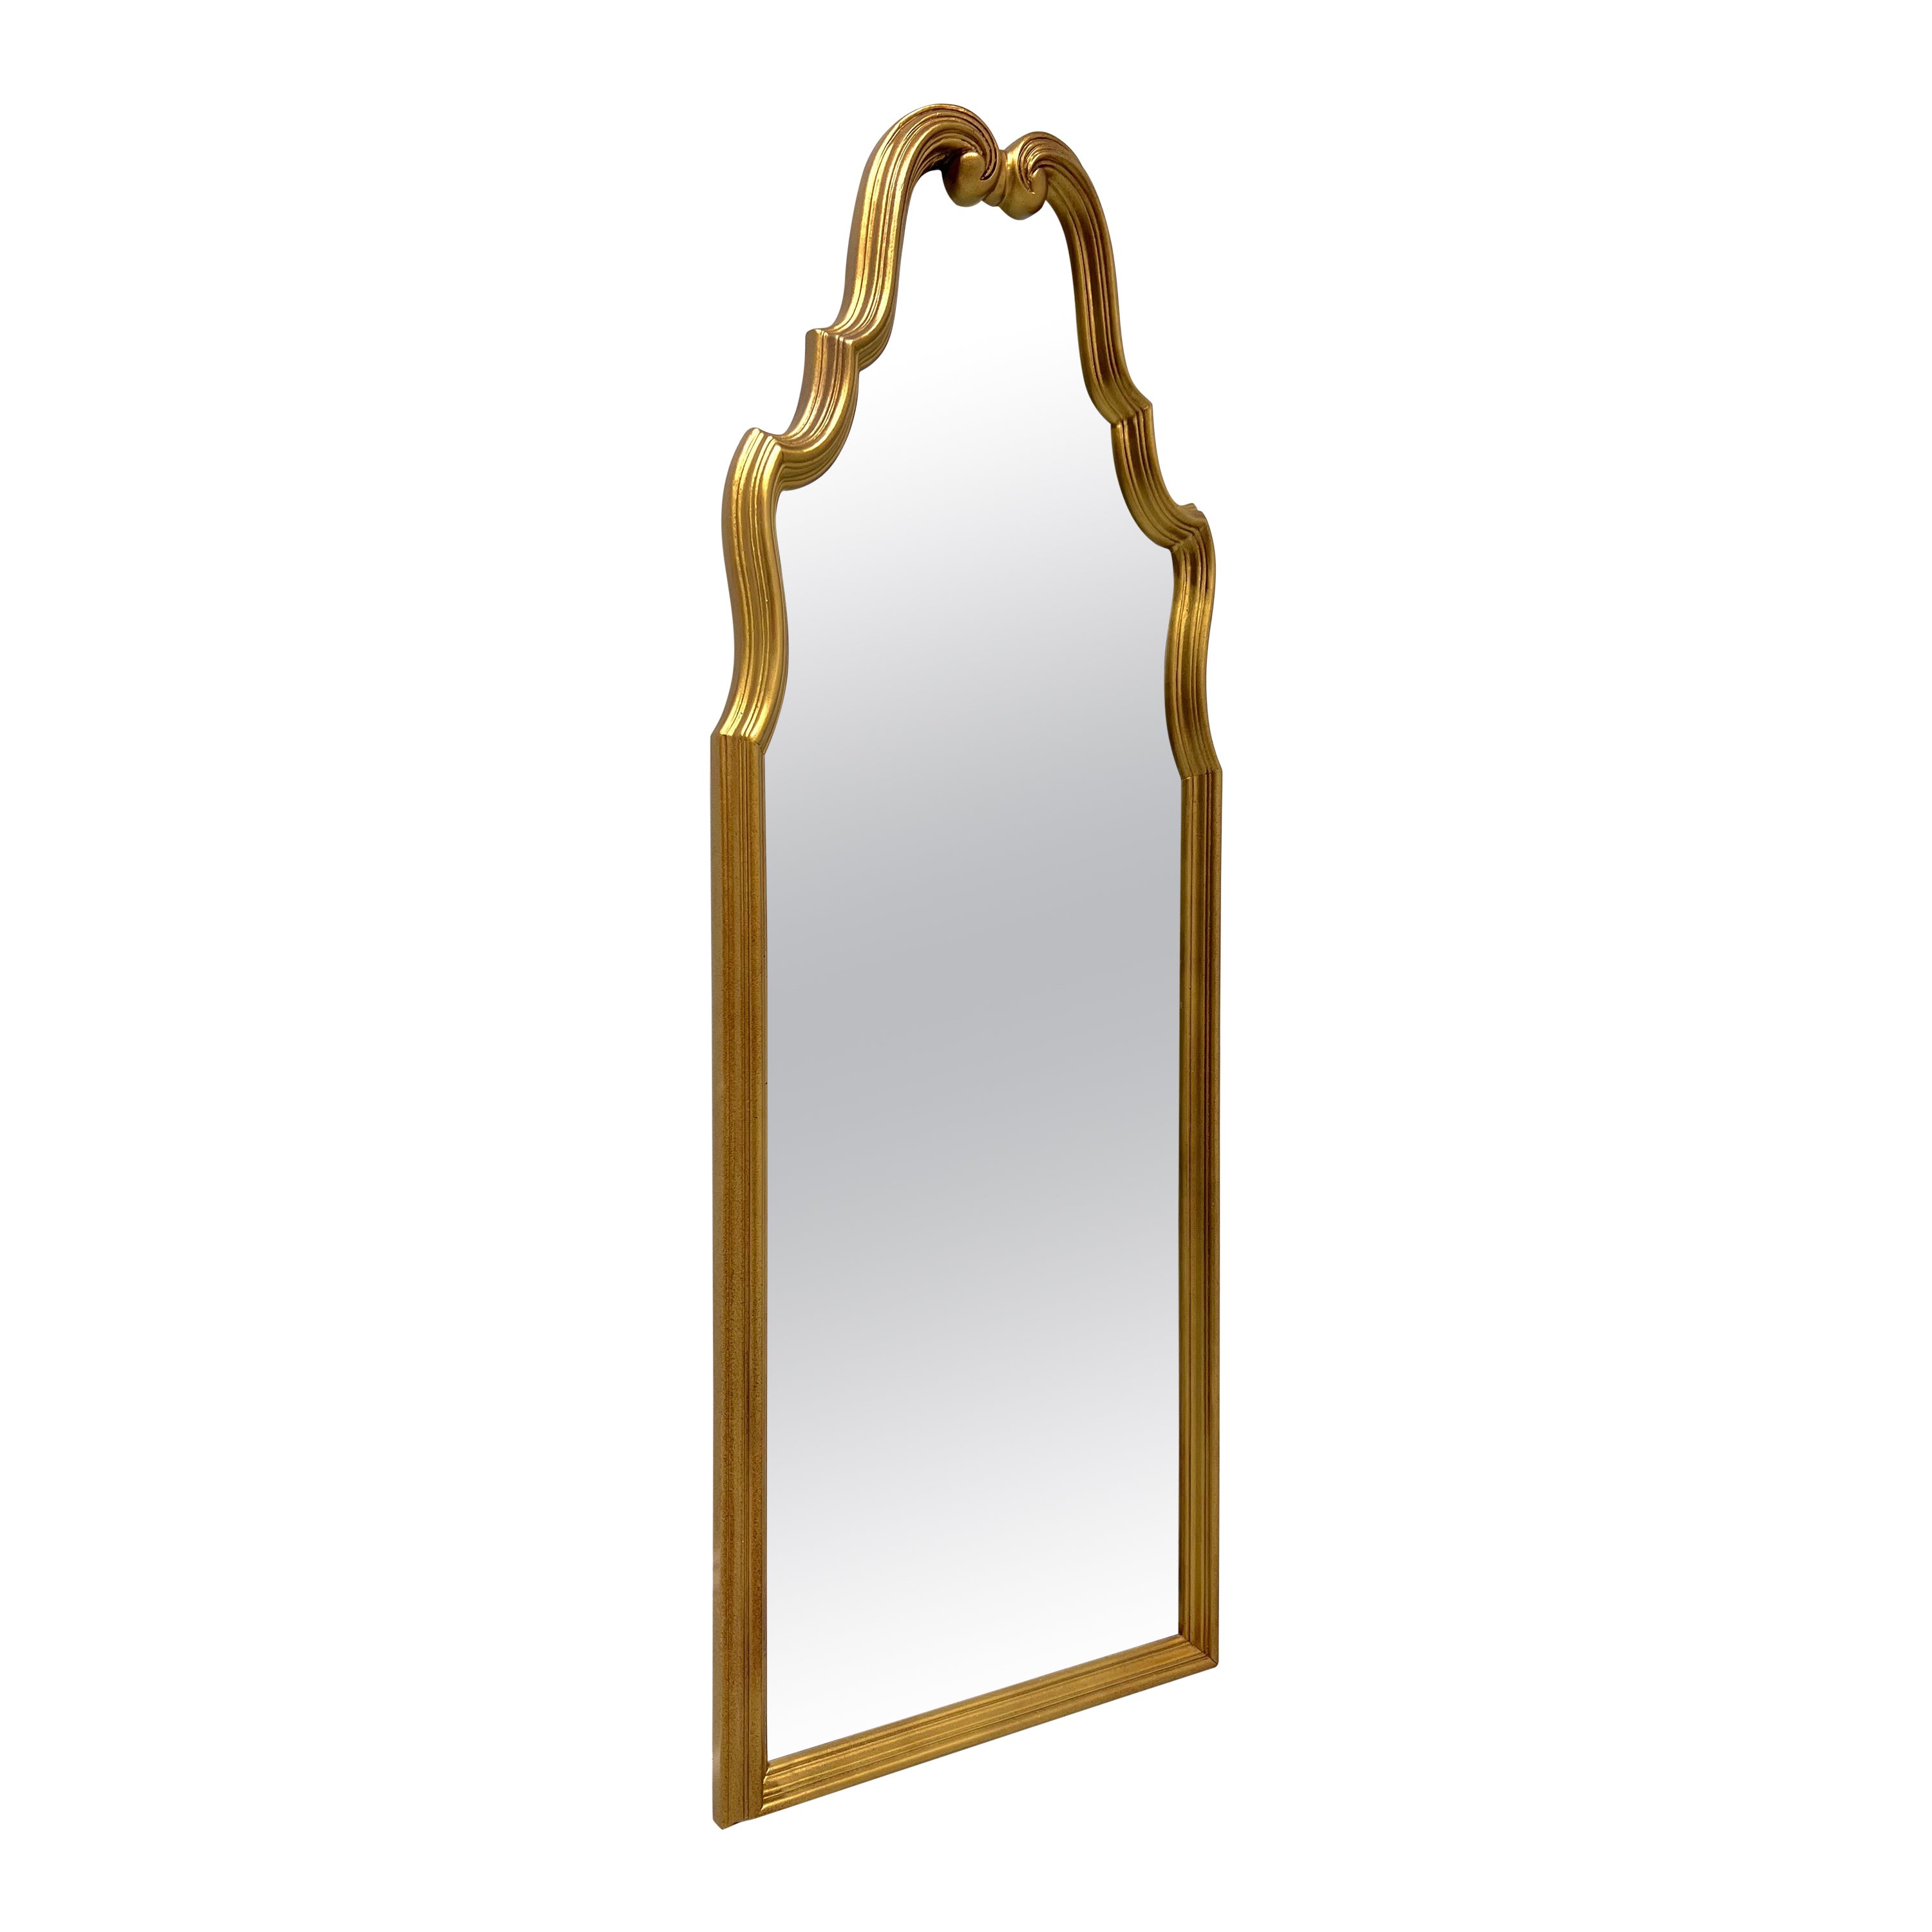 Mid 20th Century Vintage French Rococo Style Gold Wall Mirror For Sale